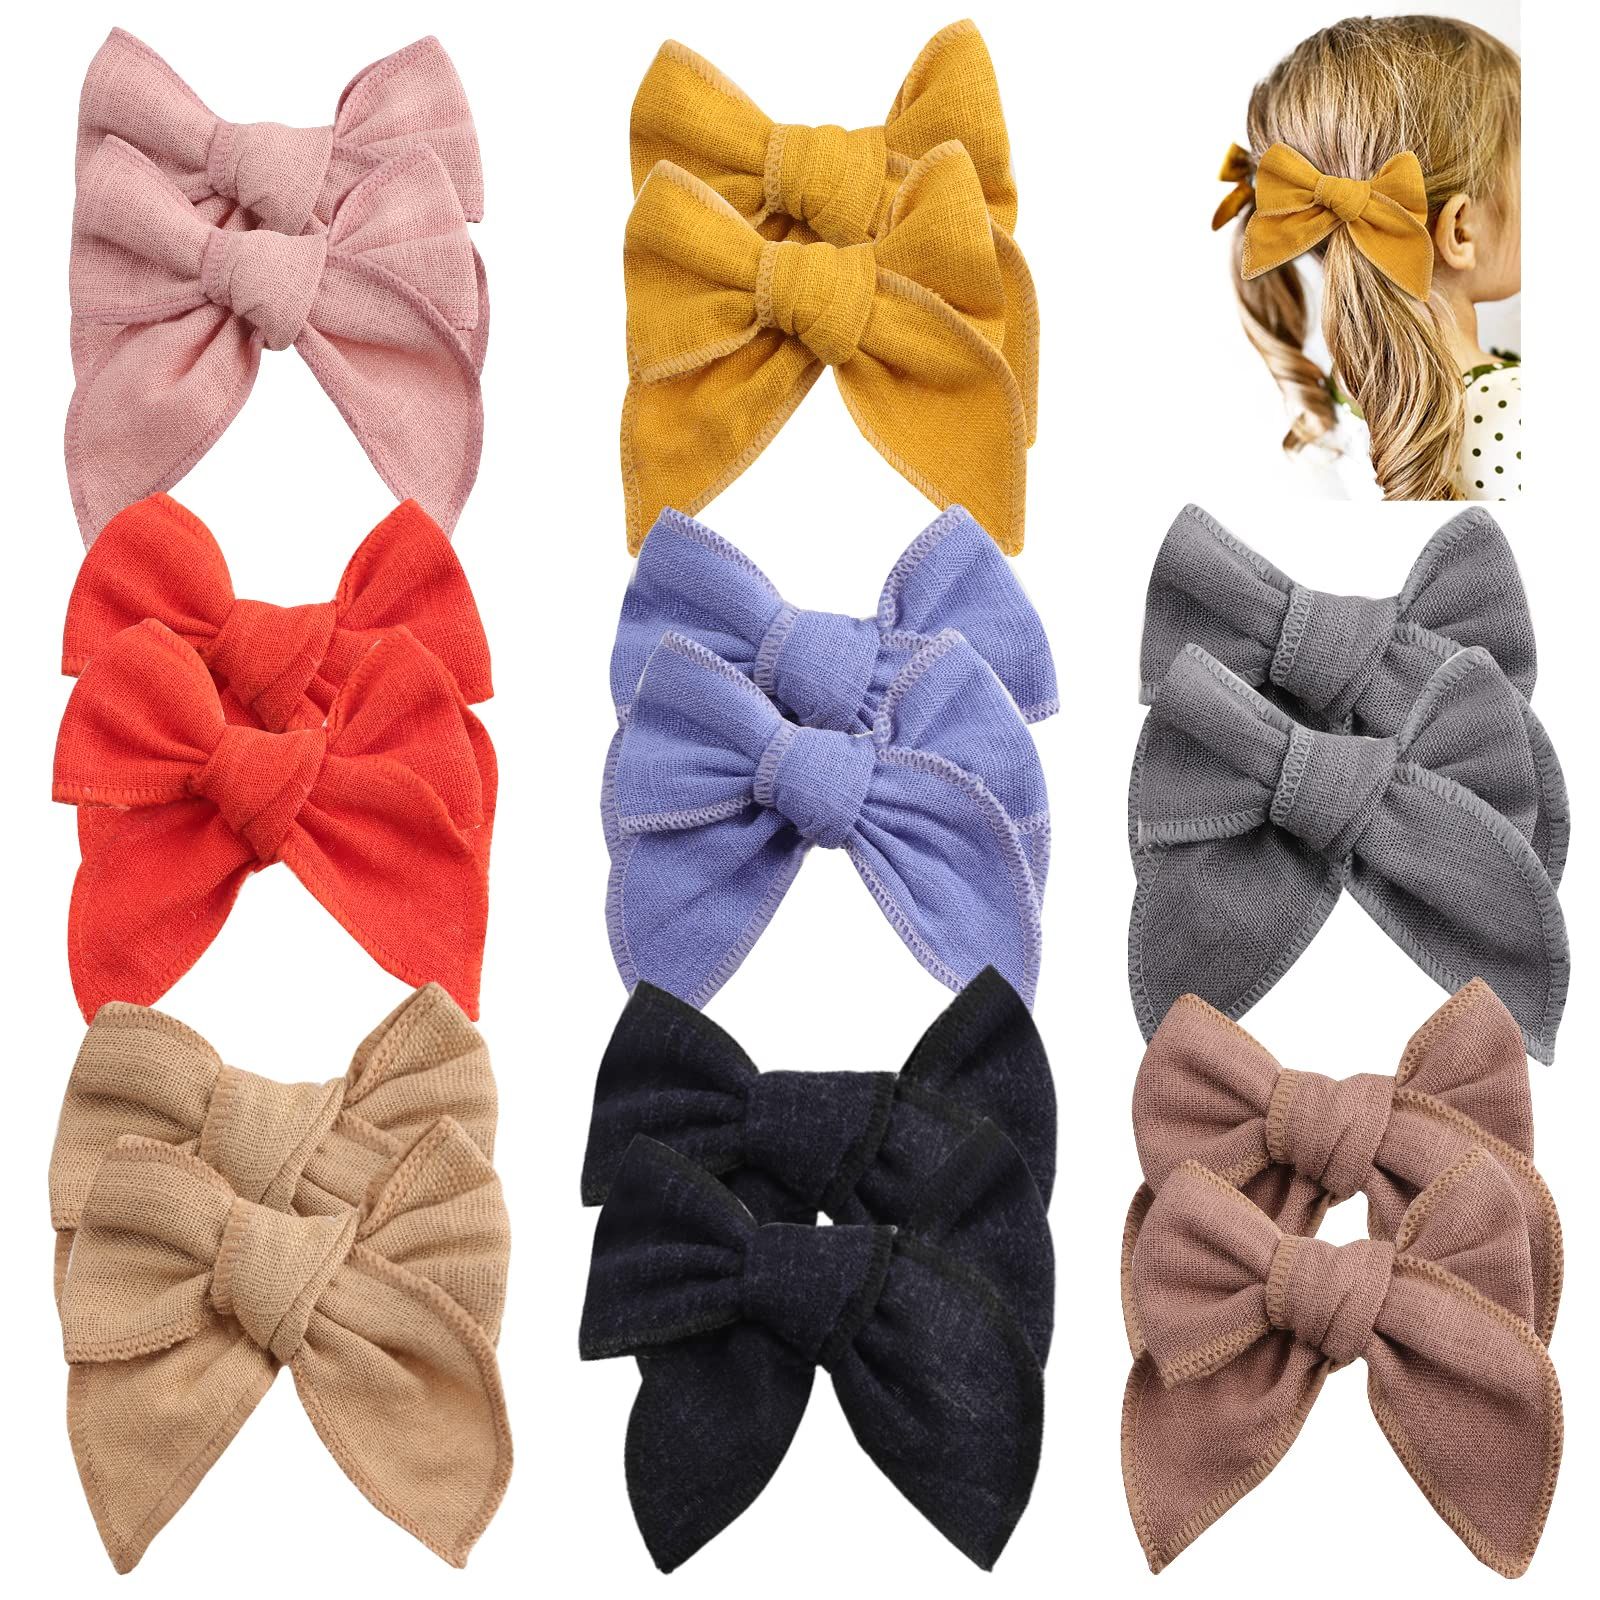 16 pcs 8 Colors in Pairs 3.5" Hand-made Hair Bows Clips for Toddler Girls, TOKUFAGU Girls Hair Bows  | Amazon (US)